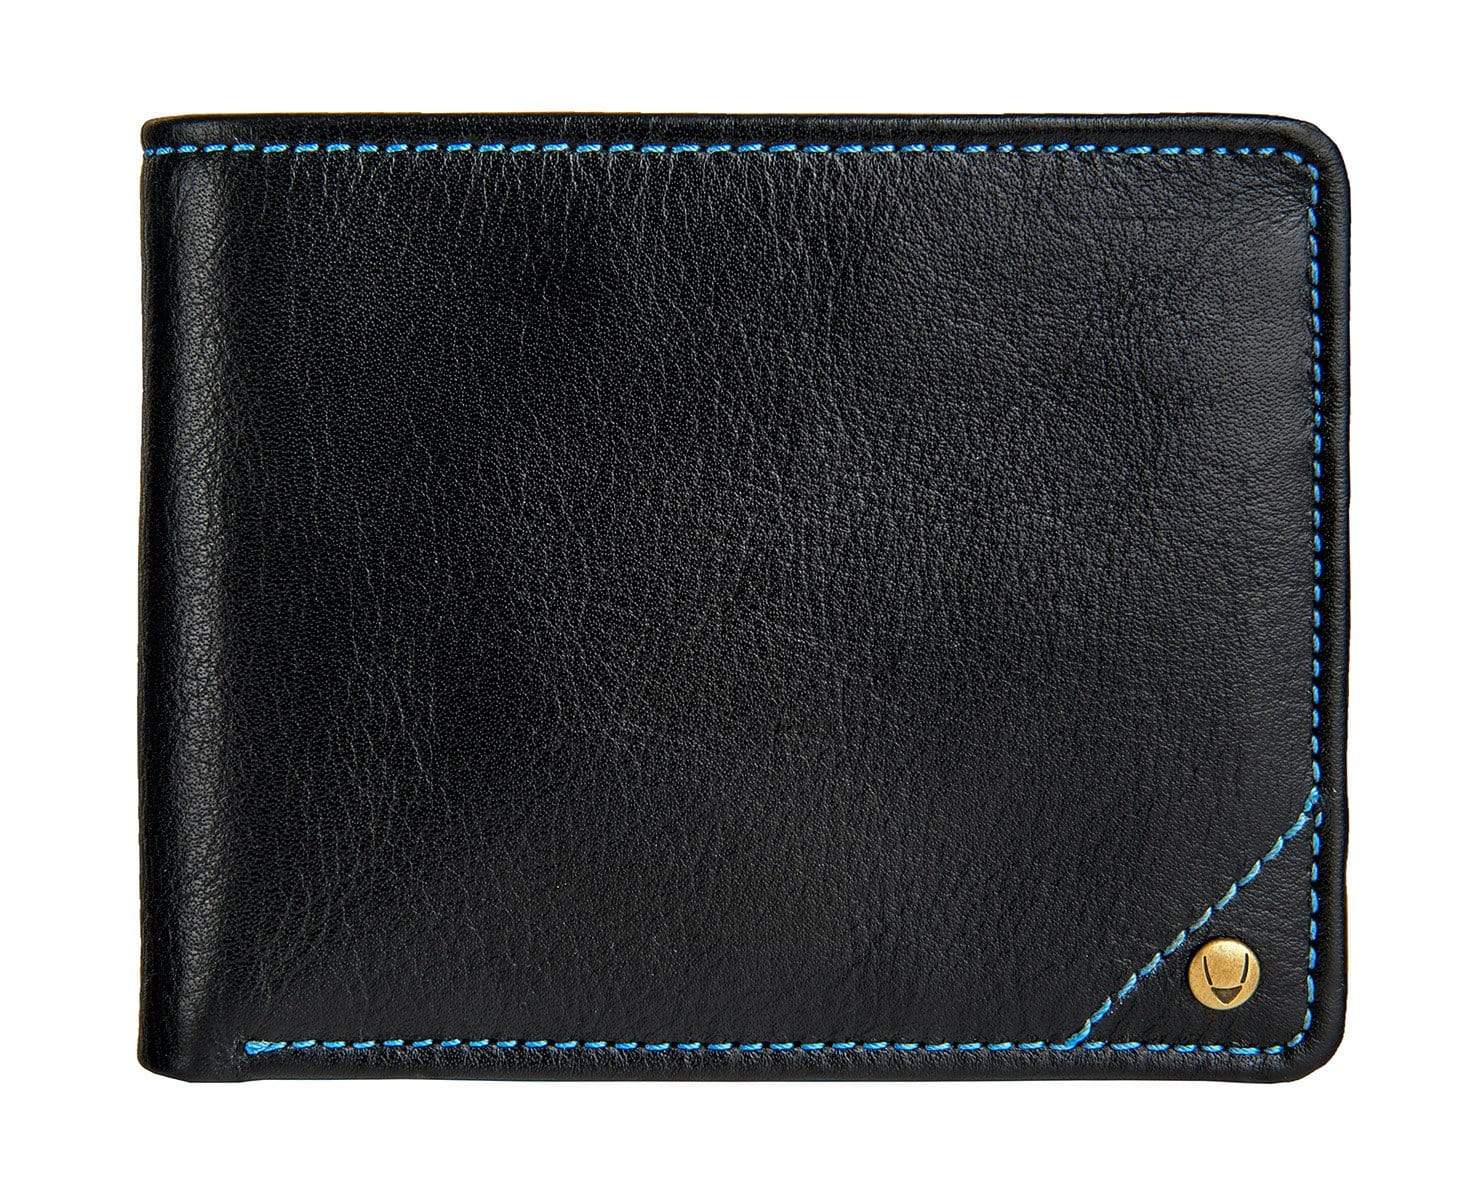 Hidesign Mens Multi-Compartment Leather Wallet Black